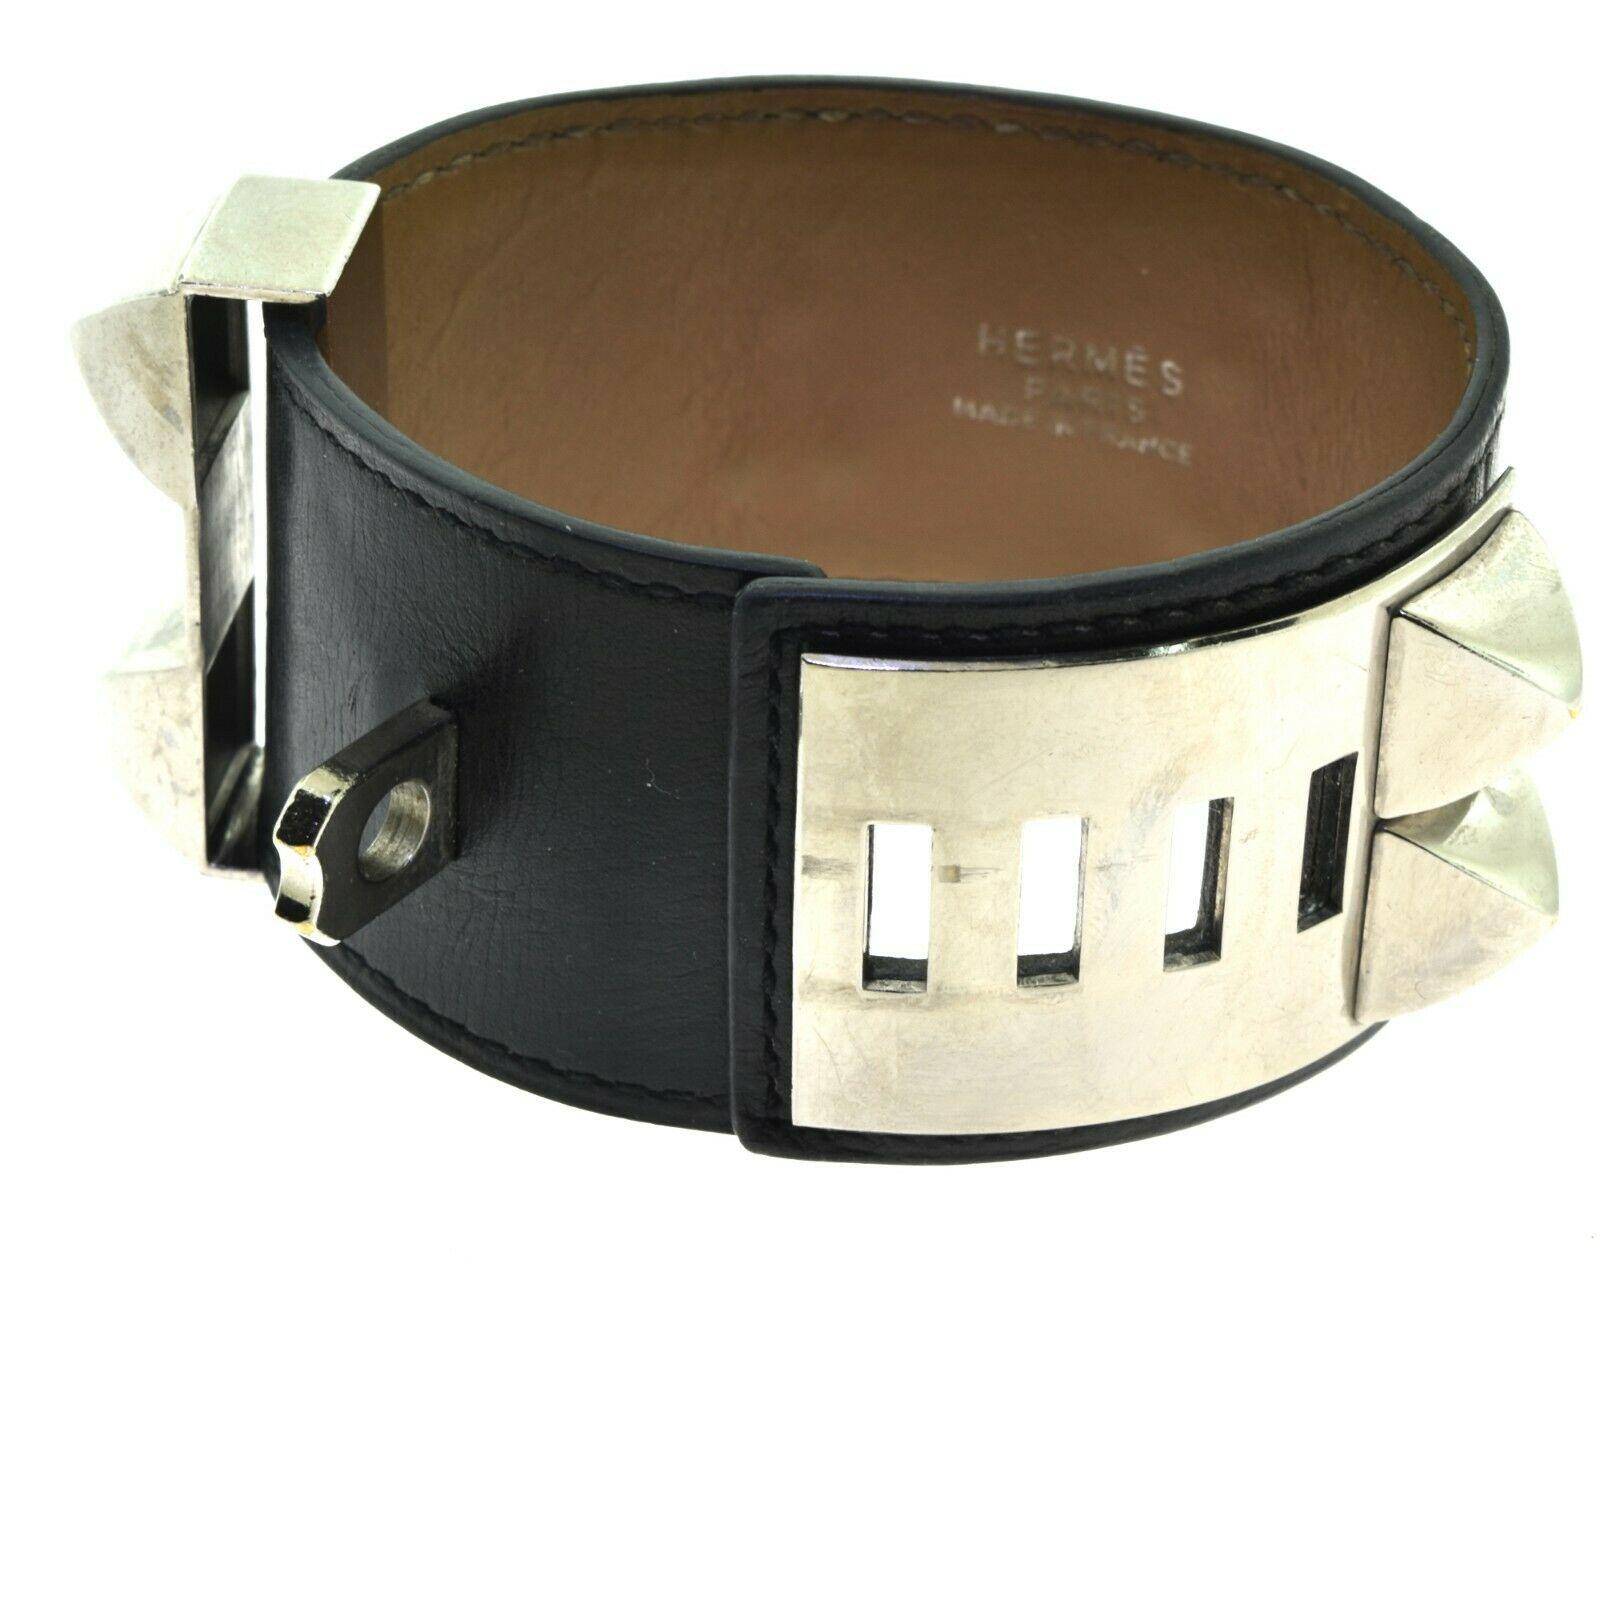 Brilliance Jewels, Miami
Questions? Call Us Anytime!
786,482,8100

Designer: Hermes

Collection: Collier de Chien

Material: Palladium plated Medor

                      Box Calfskin 

Circumference: (greater than) < 7.5 inches

Hallmarks: Hermes